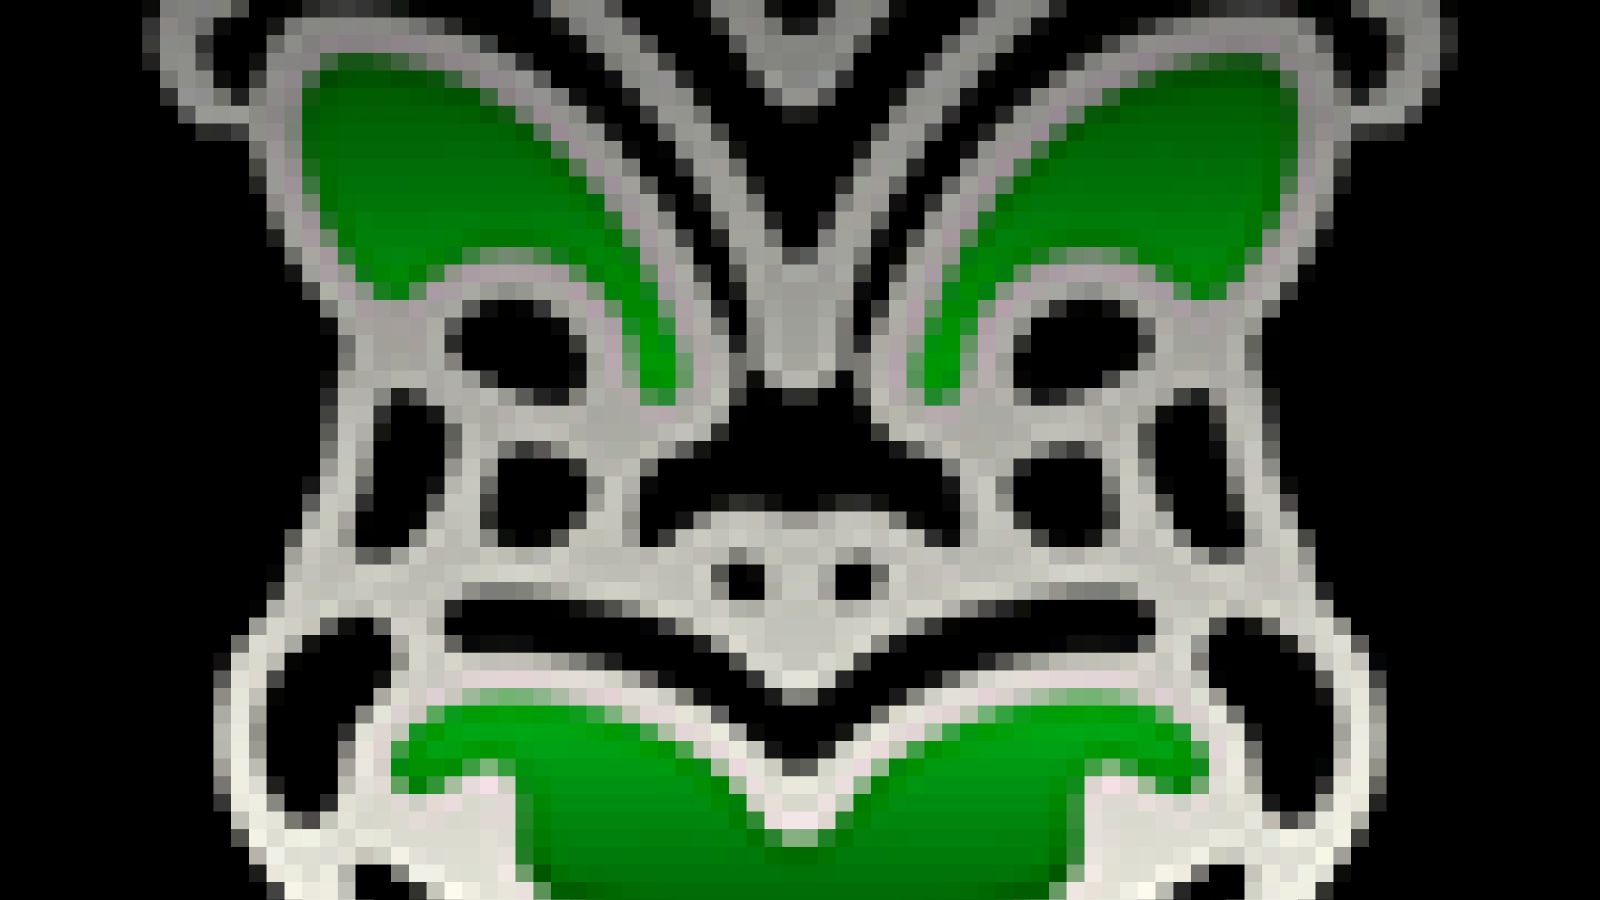 A computer graphic of a green Kura face on a black background.